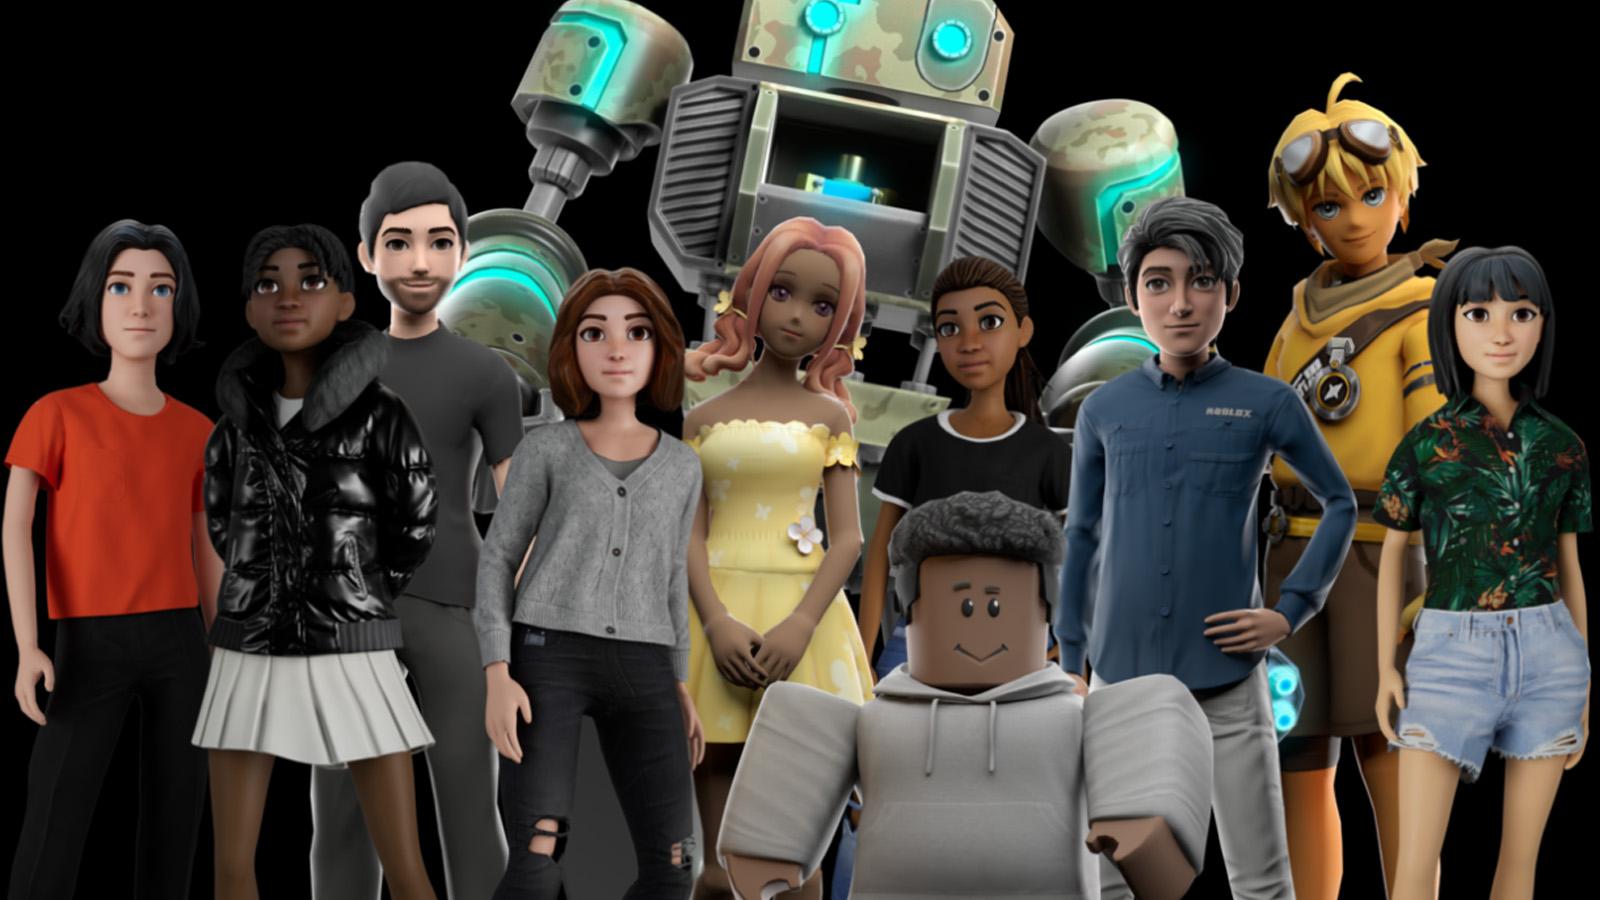 Roblox set to start charging players for new avatar bodies and heads